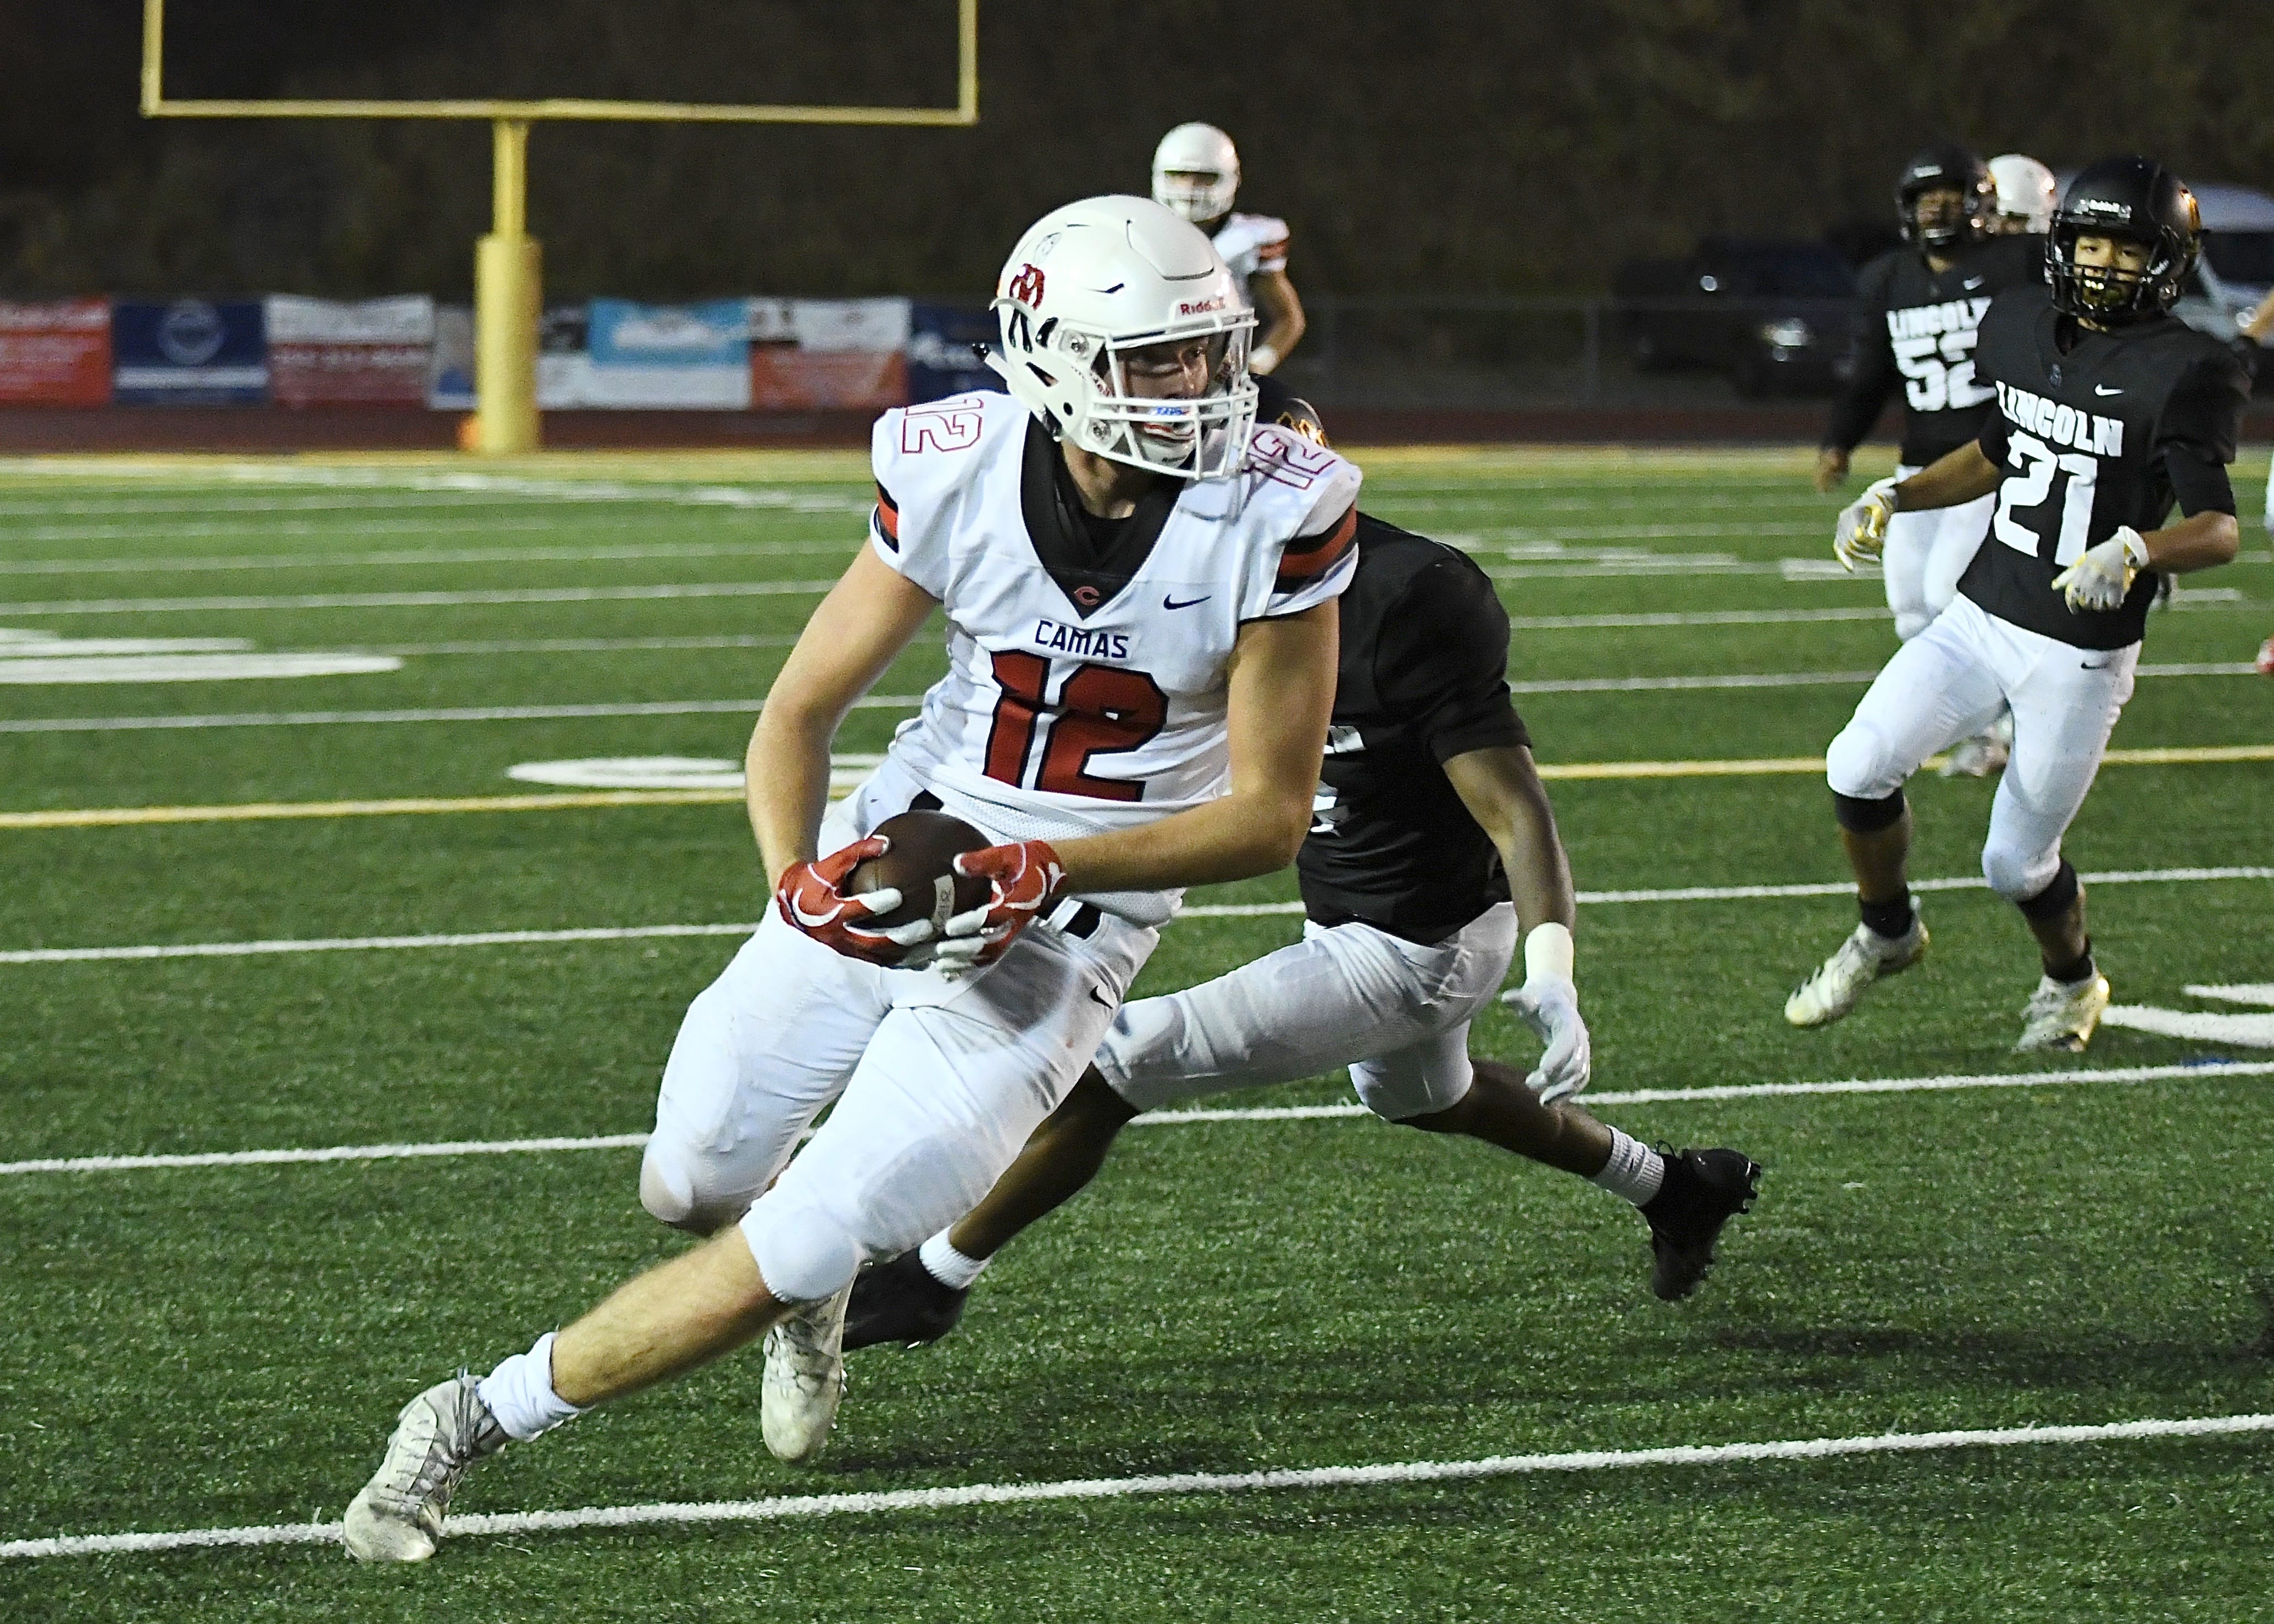 Shane Jamison (12) scores a touchdown for Camas (Kris Cavin for The Columbian)